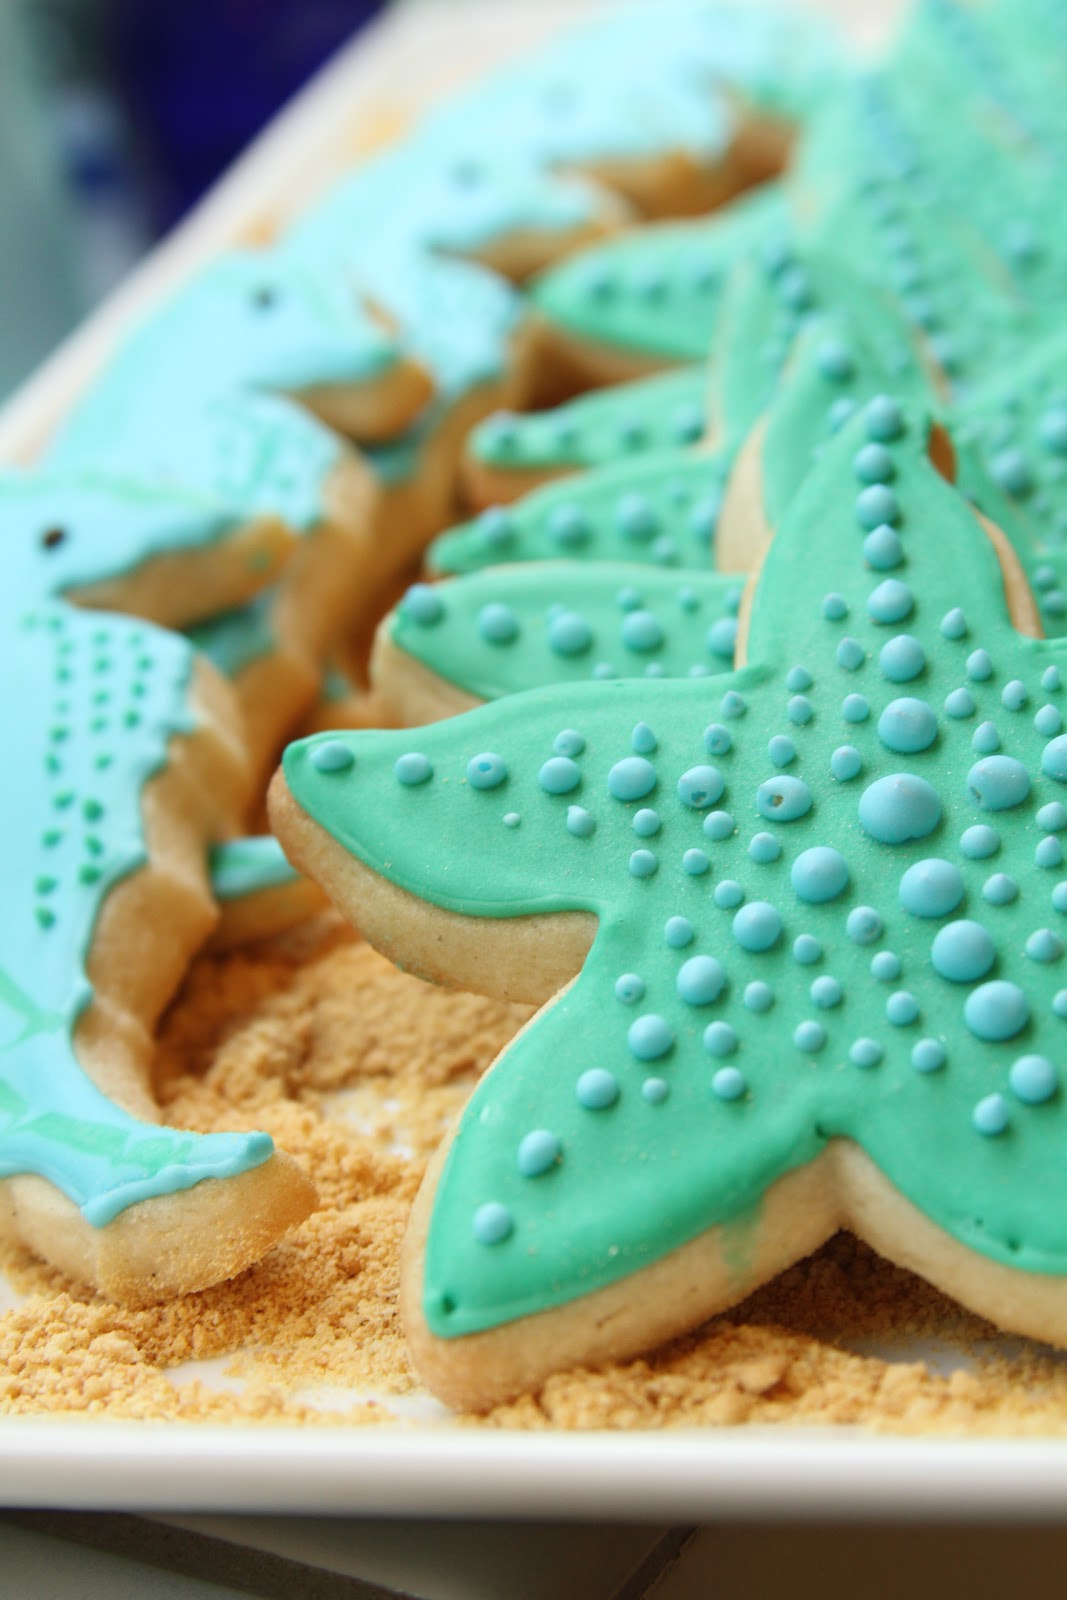 I Like to Bake: Under the Sea Cookies